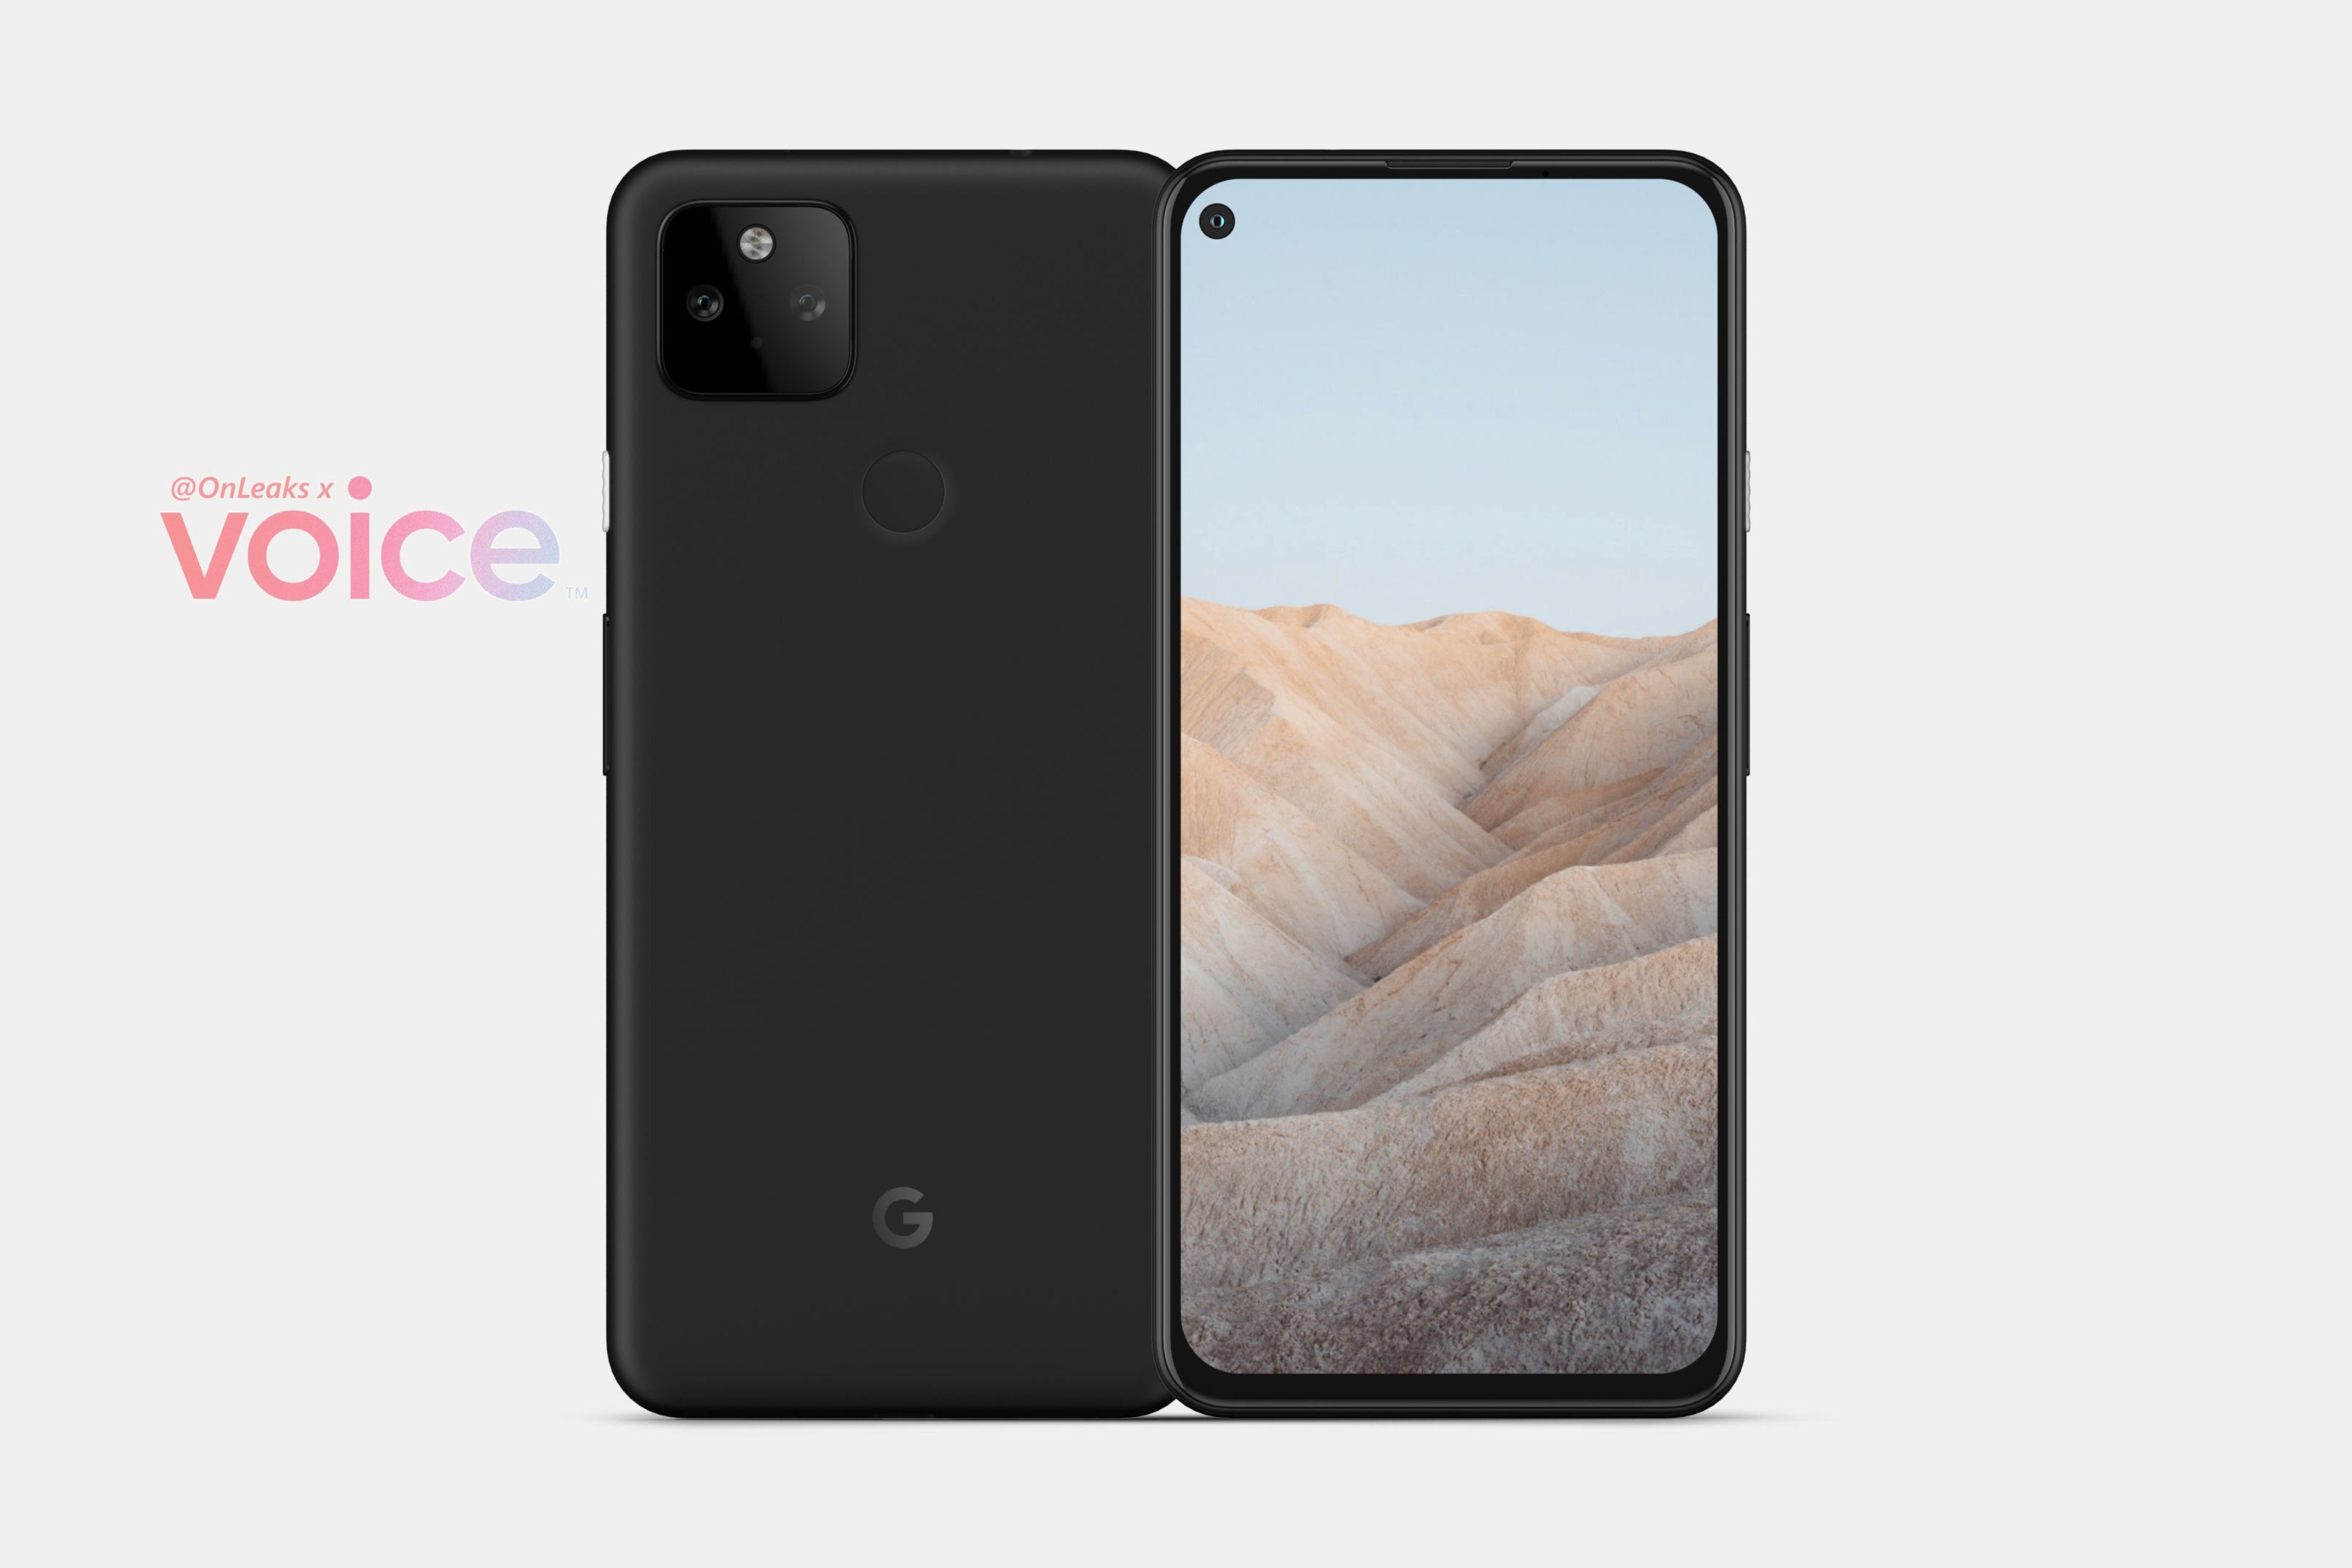 Google Pixel 5a leaks in full with dual-camera setup, very familiar design